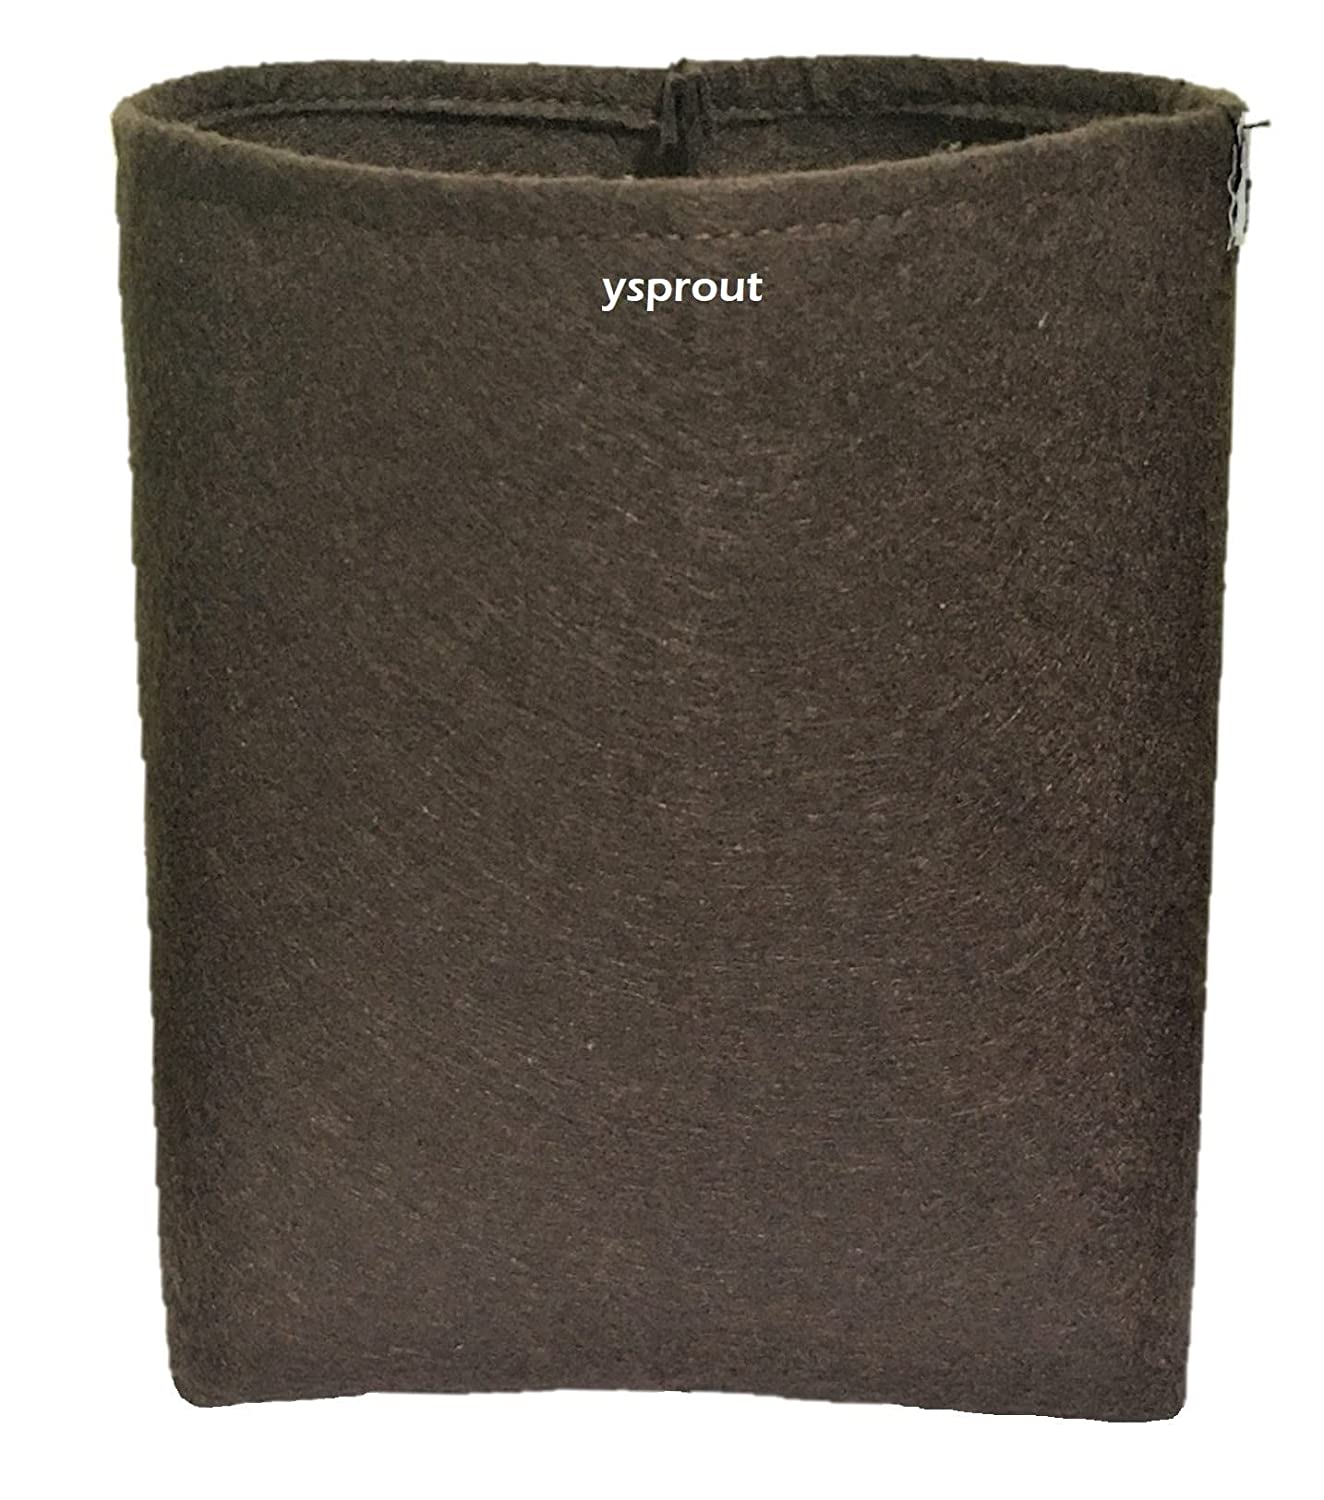 Oxypot 140 GSM Geo Fabric Grow Bags (6x6.5 Inches, Coffee Colour)- Pack of 18